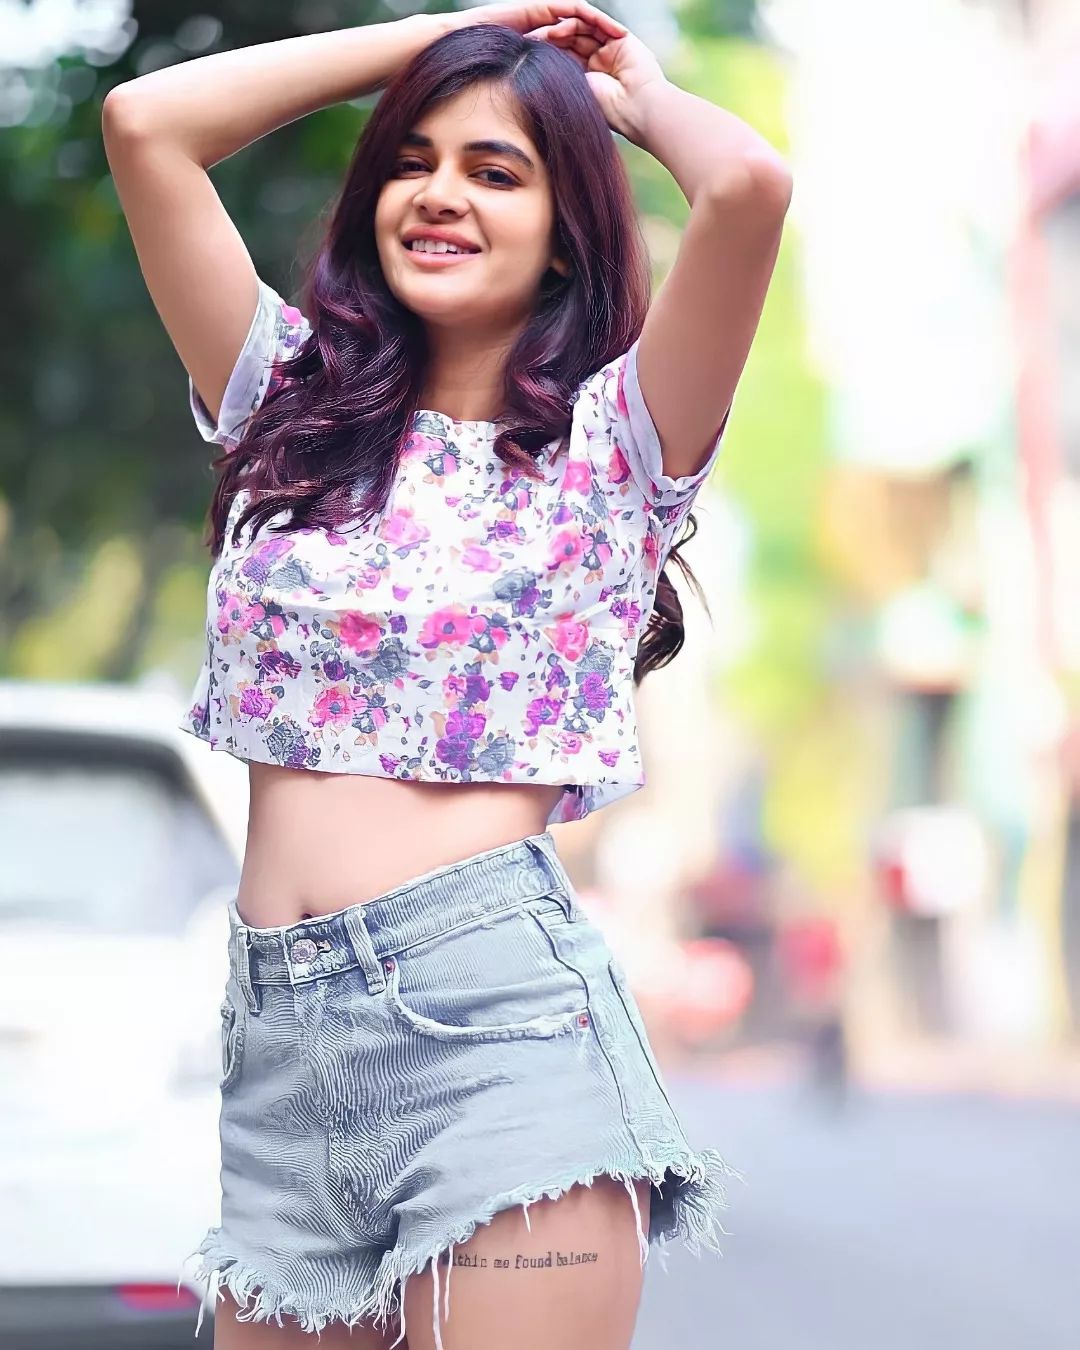 Madhumita-Sarcar-looks-cute-and-alluring-in-crop-top-See-the-PICS-01-Bengalplanet.com